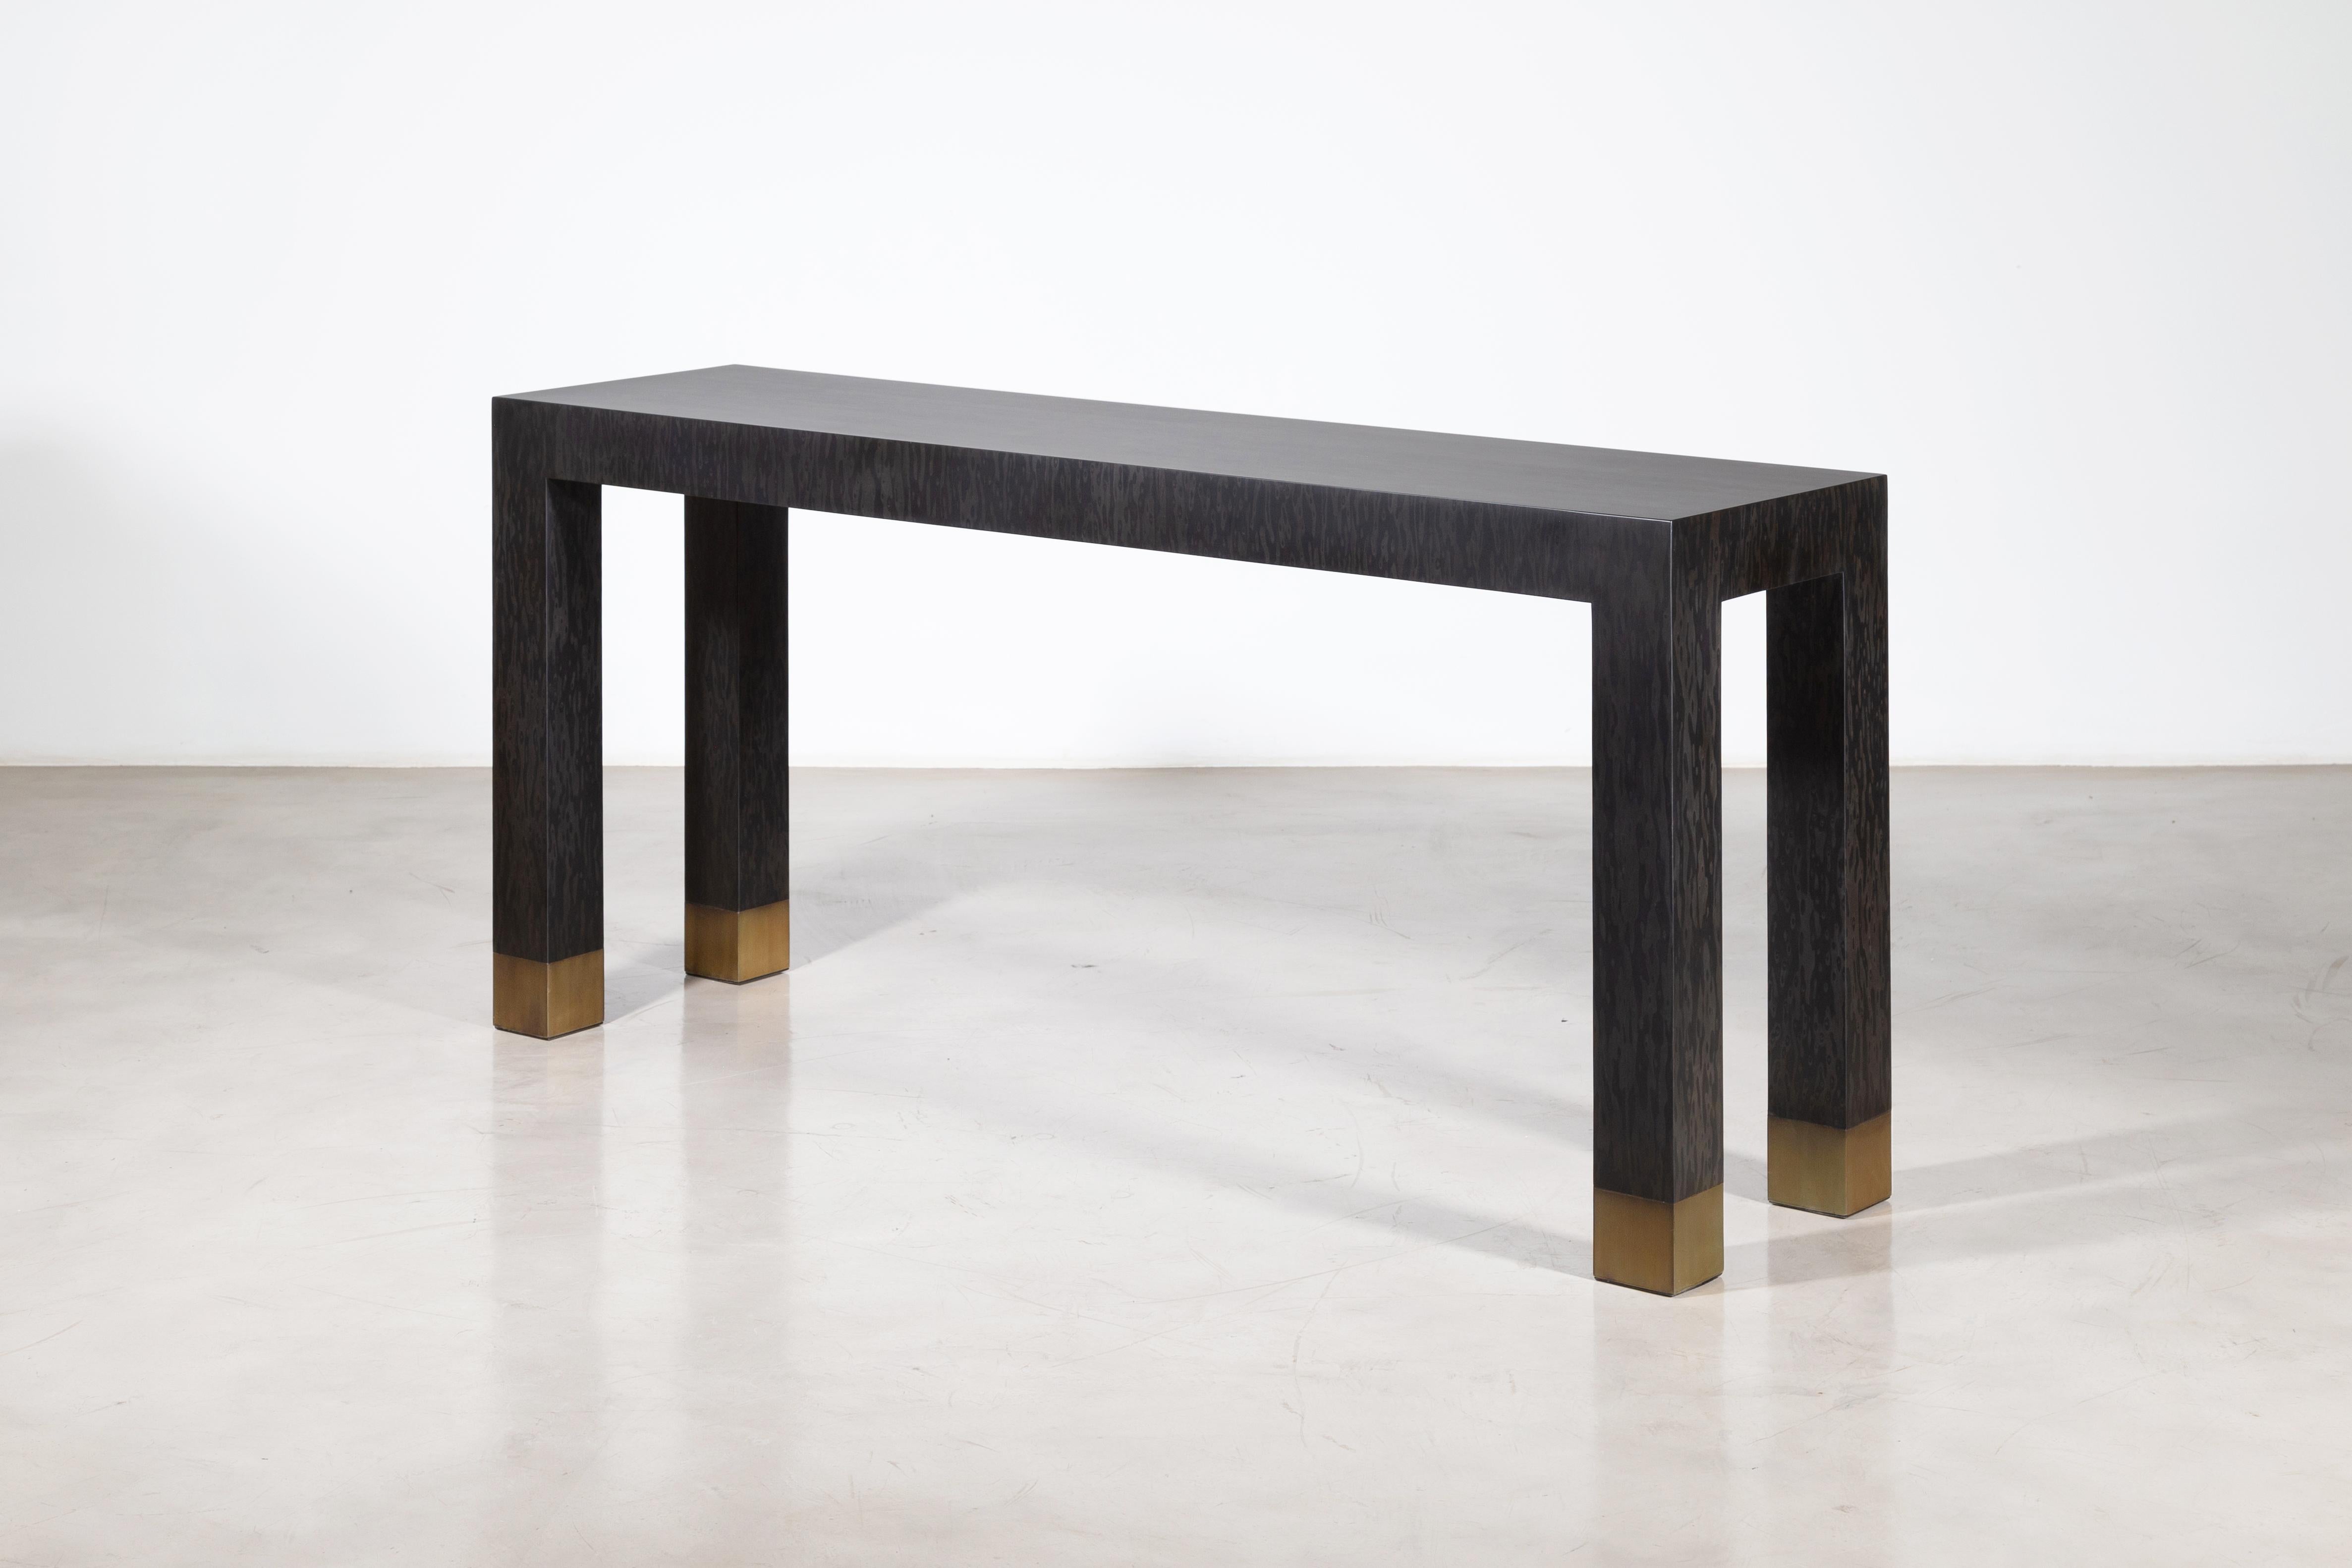 Dino Modern console table with bronze sabots in black maple wood by Costantini

Measurements are 90